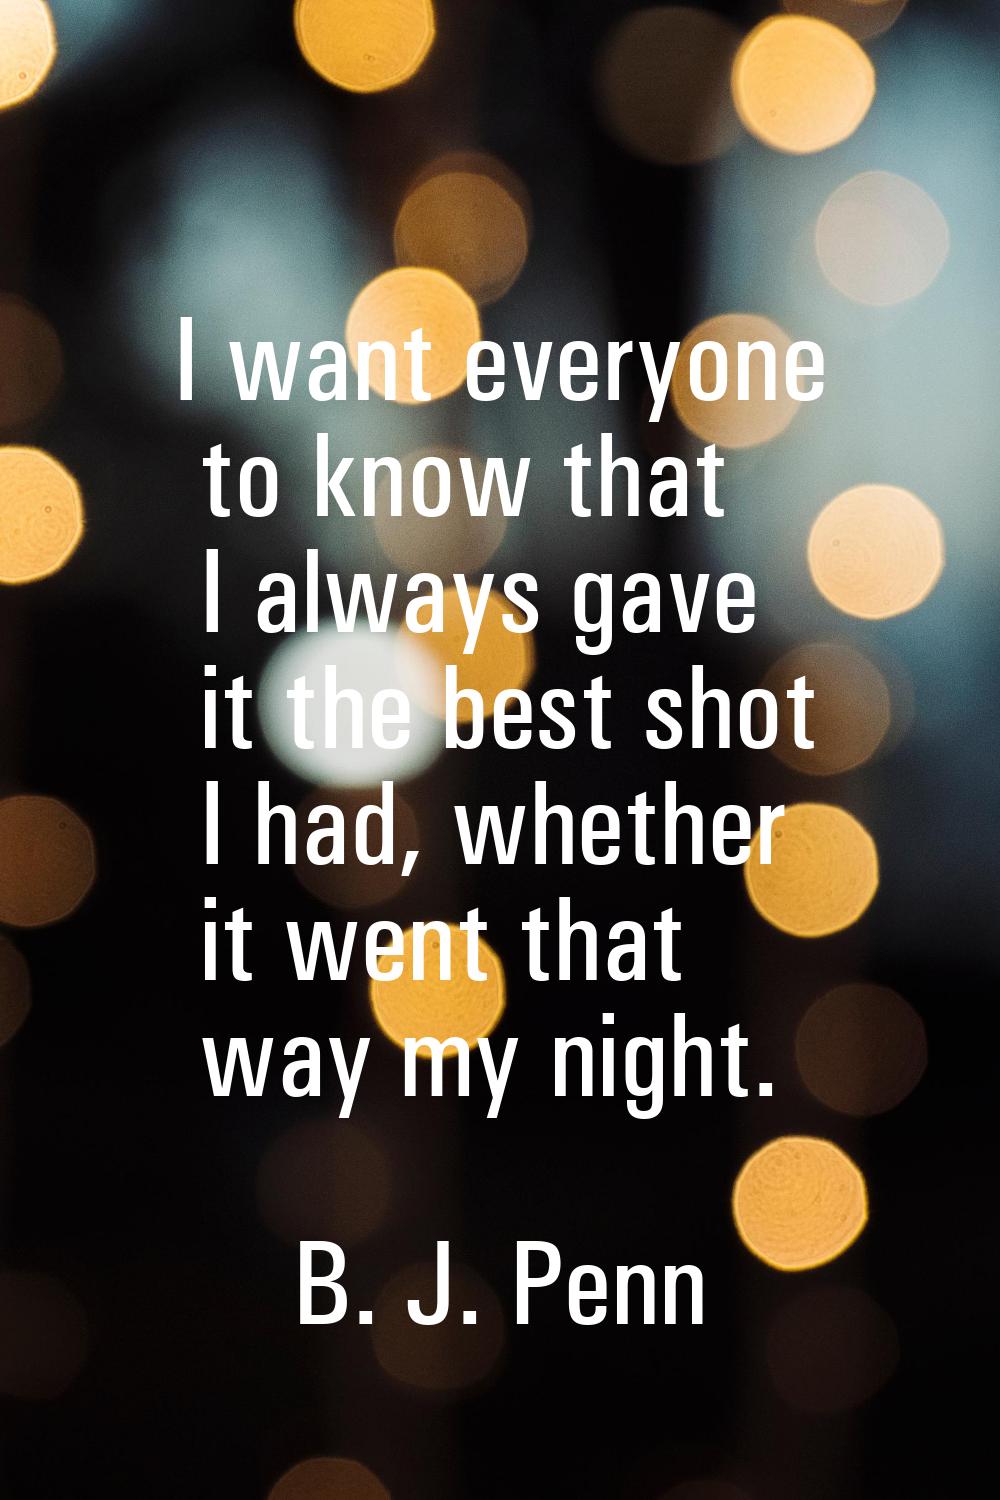 I want everyone to know that I always gave it the best shot I had, whether it went that way my nigh